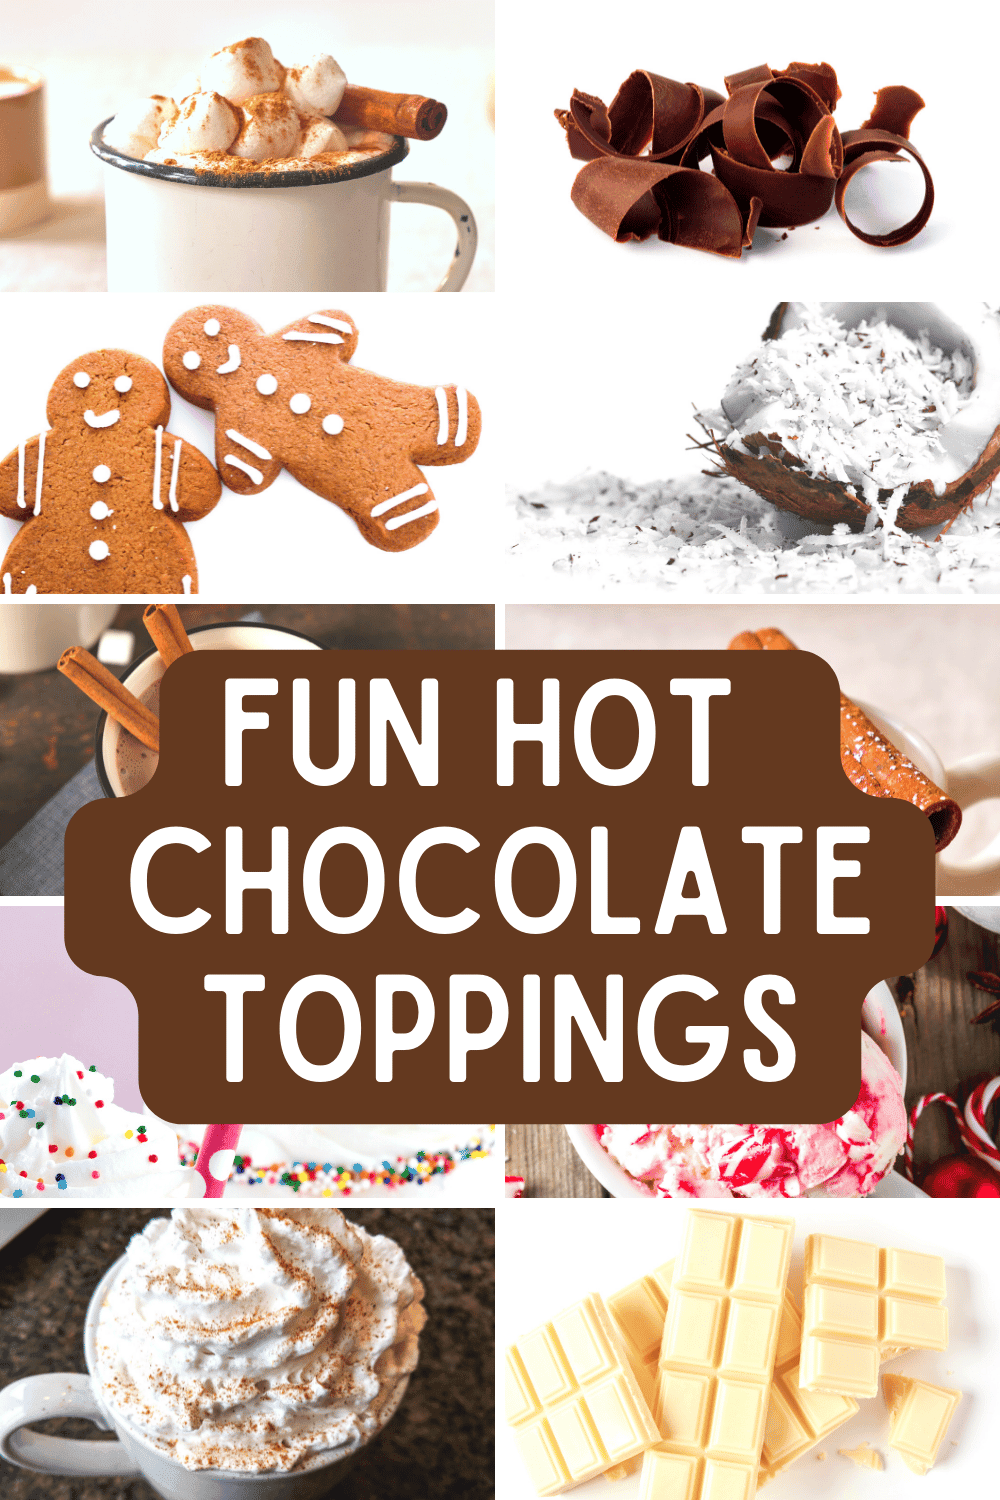 What are good hot chocolate toppings? (things that go well with hot chocolate) text over different images of hot chocolate toppings